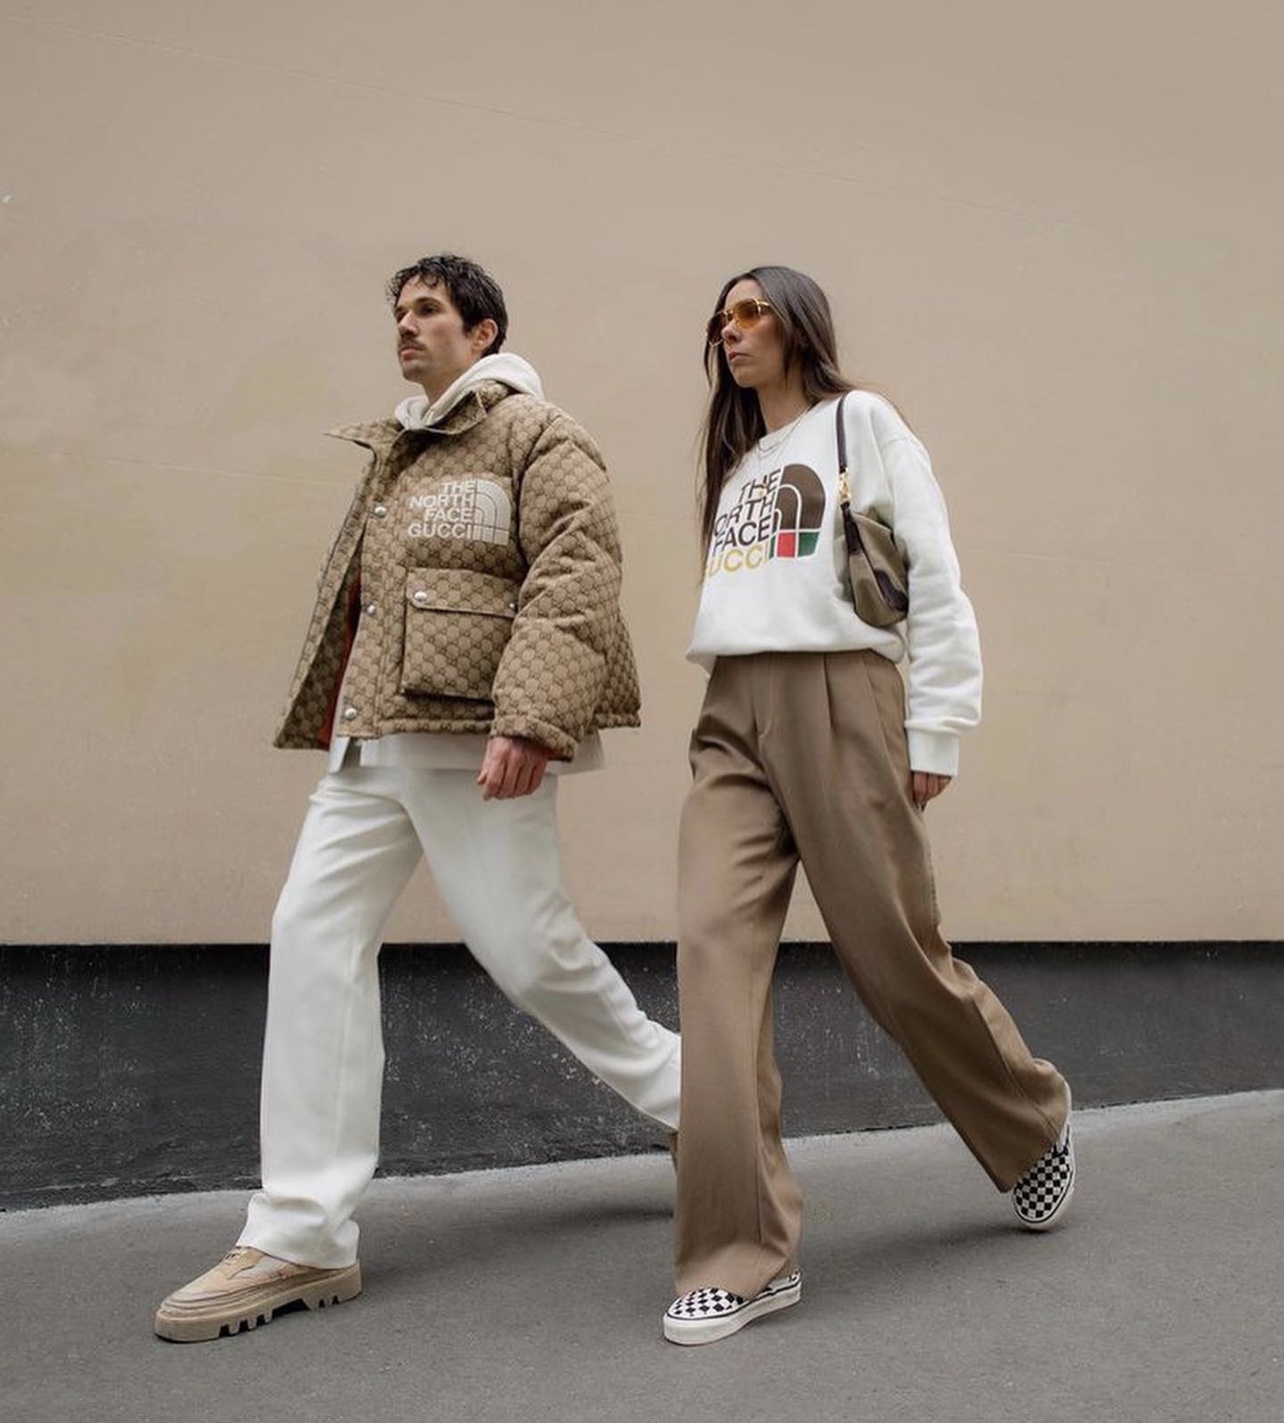 The North Face x Gucci Collection is Going to Take Over Street Style